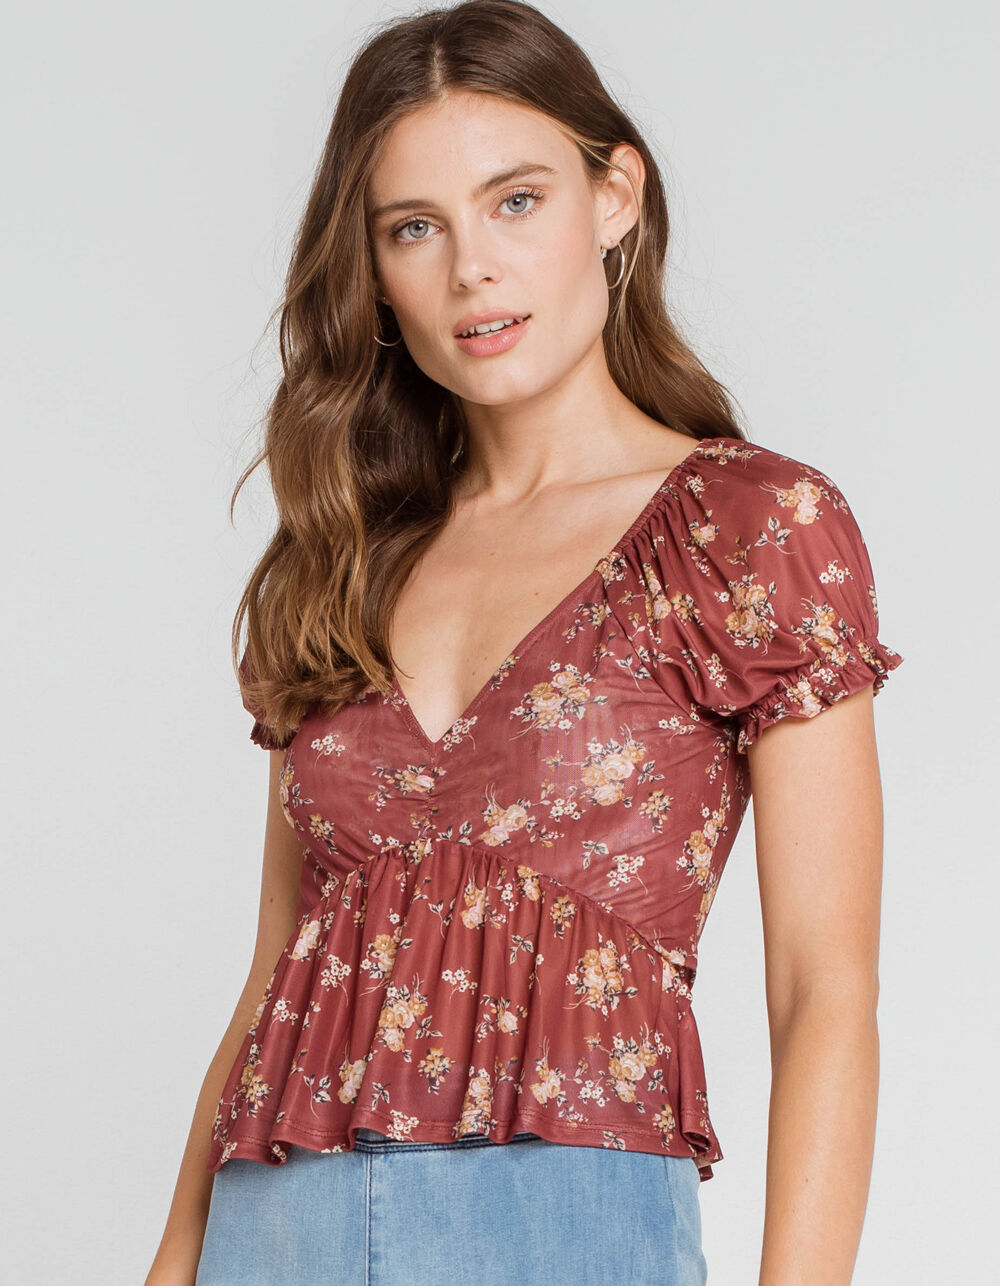 WEST OF MELROSE Meshing Around Womens Babydoll Top - BURNT RED | Tillys